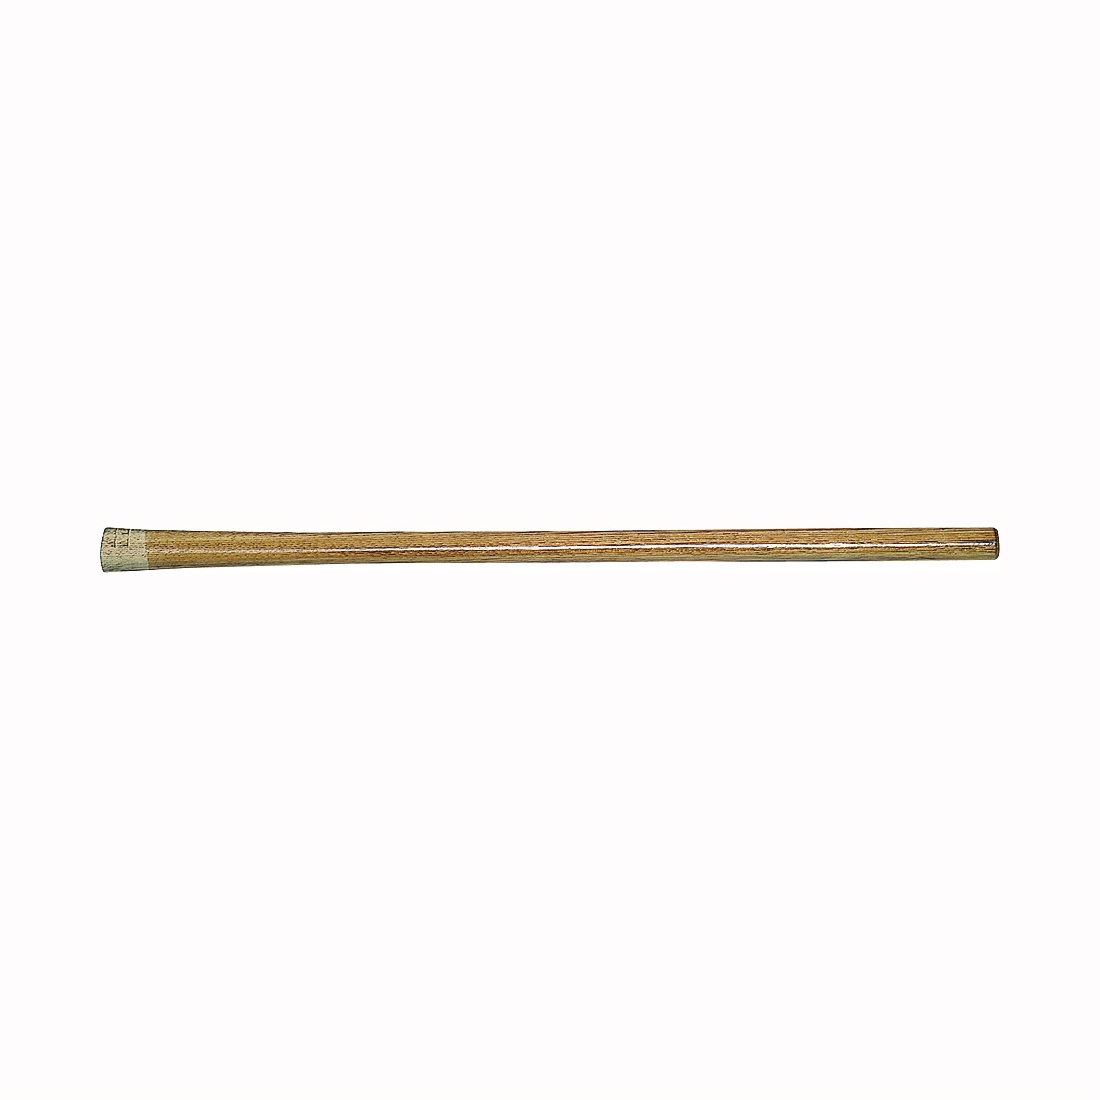 65141 Post Maul Handle, 36 in L, Wood, Clear Lacquer, For: Cast Iron Mauls